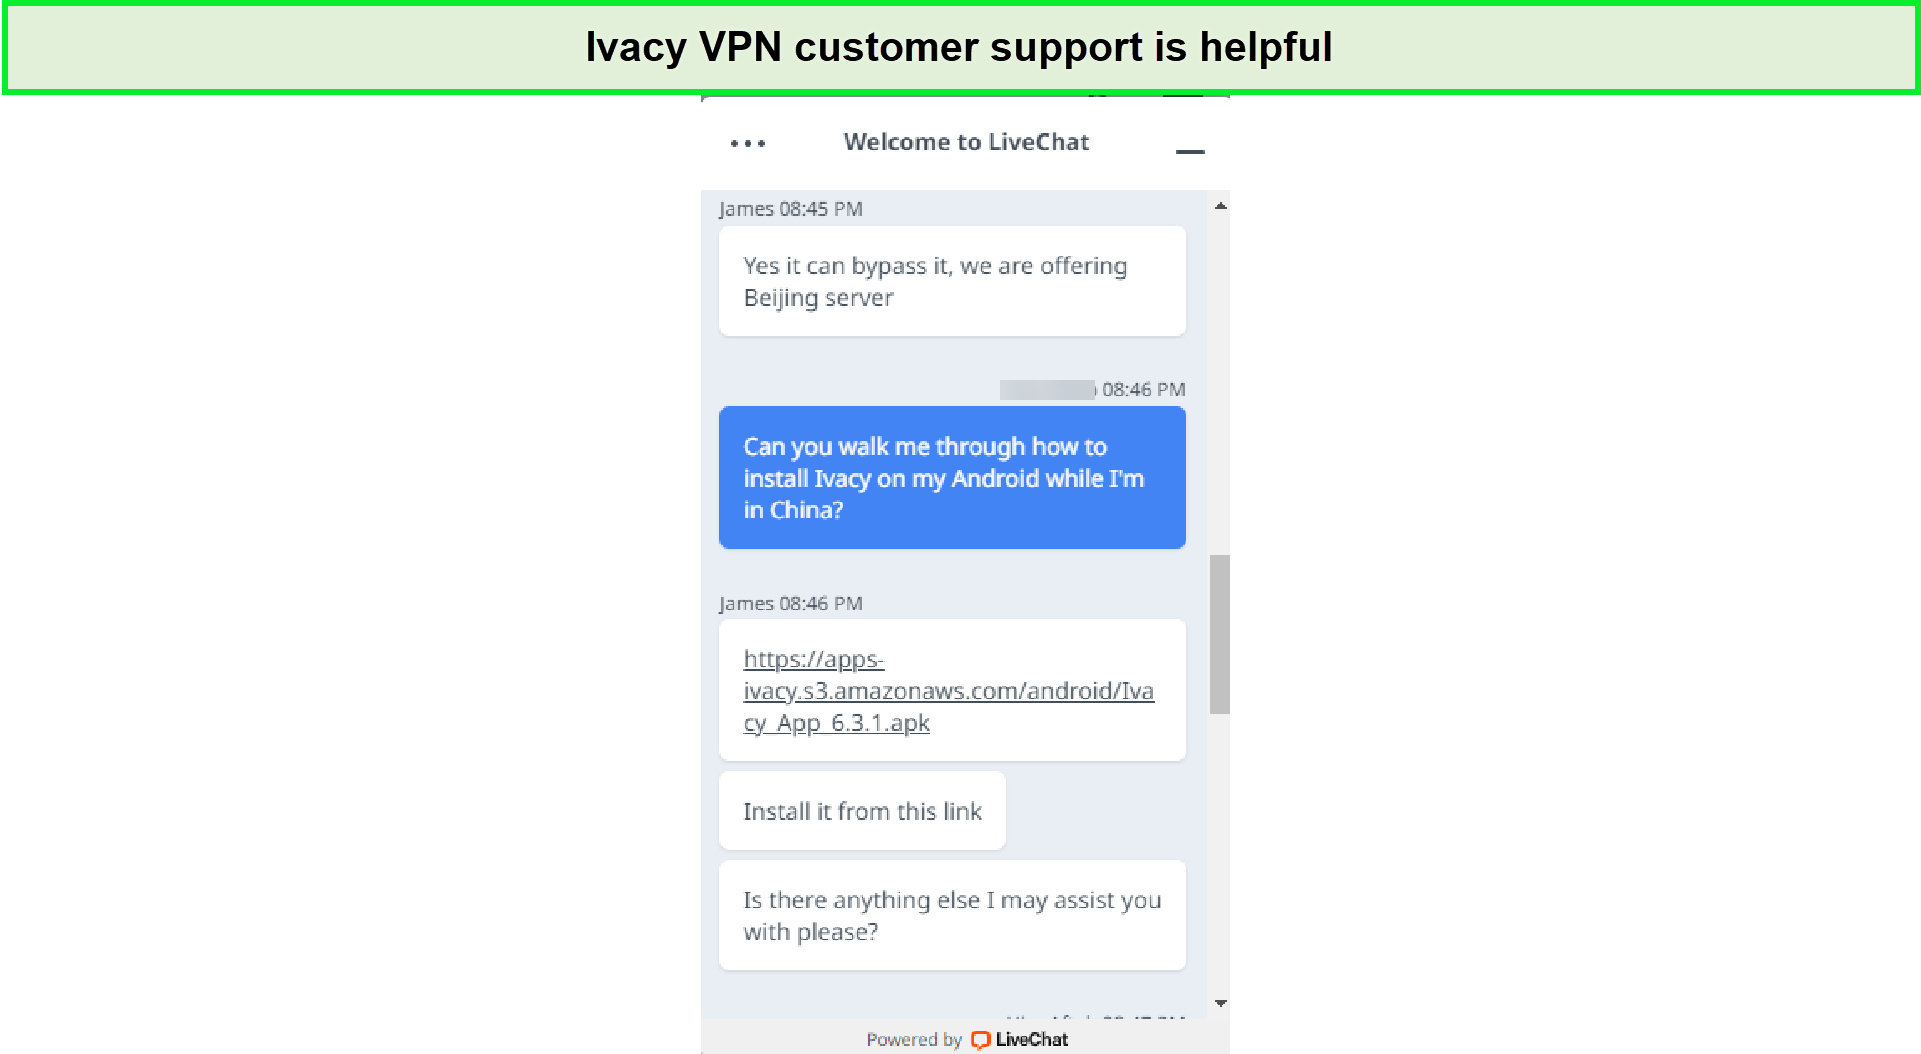 ivacy-customer-support-in-Spain